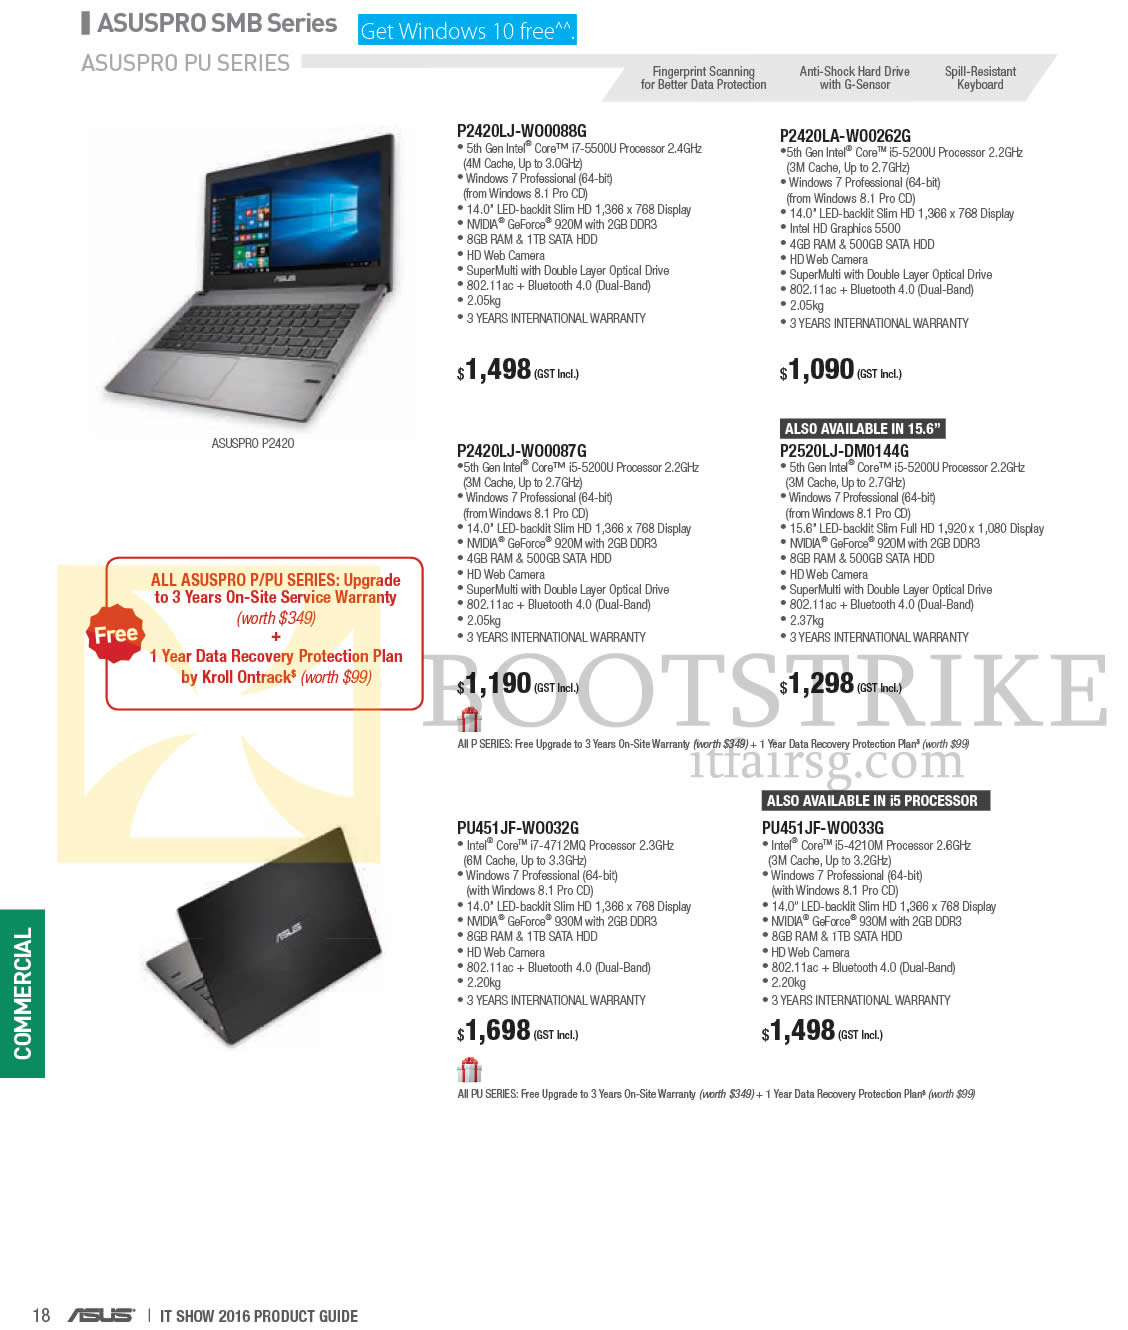 IT SHOW 2016 price list image brochure of ASUS ASUSPro Notebooks P2420LJ-WO0088G, WO0087G, P2420LA-WO0262G, P2520LJ-DM0144G, PW451JF-W0032G, W0033G